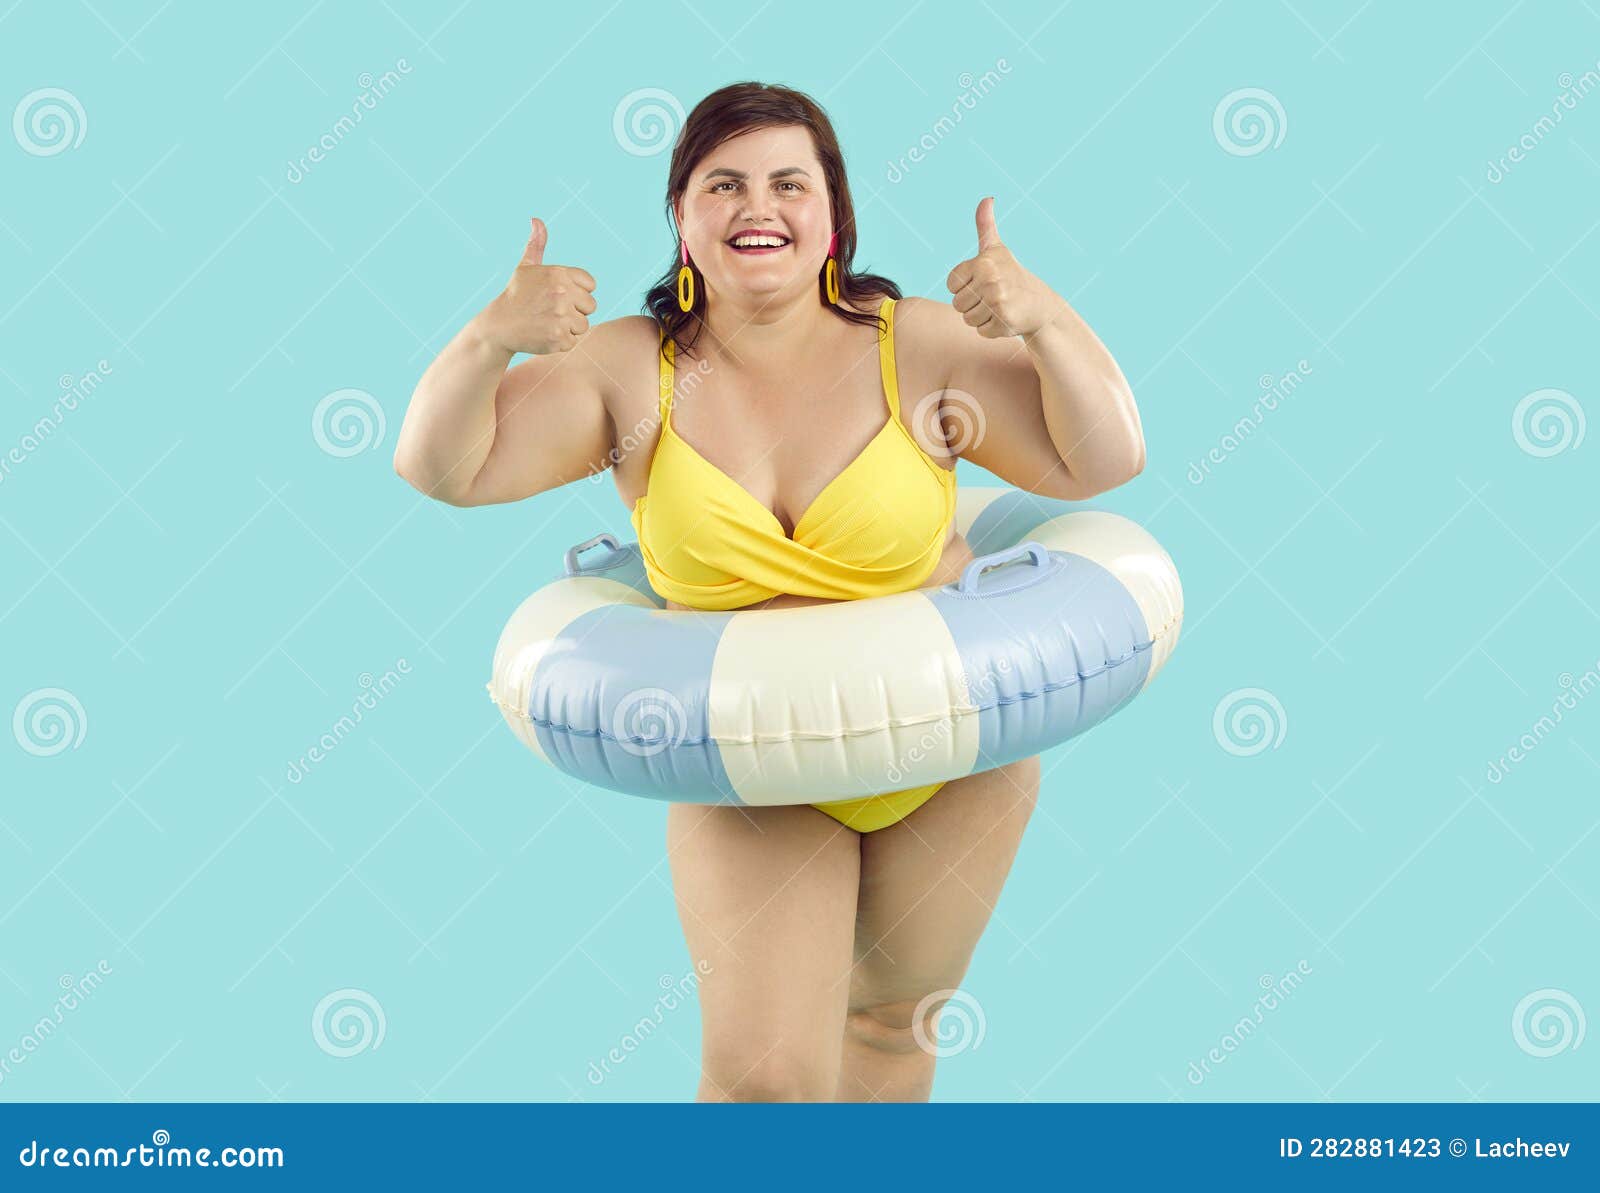 portrait happy smiling fat woman beach rubber ring wearing yellow swimsuit showing thumb up sign isolated blue studio 282881423